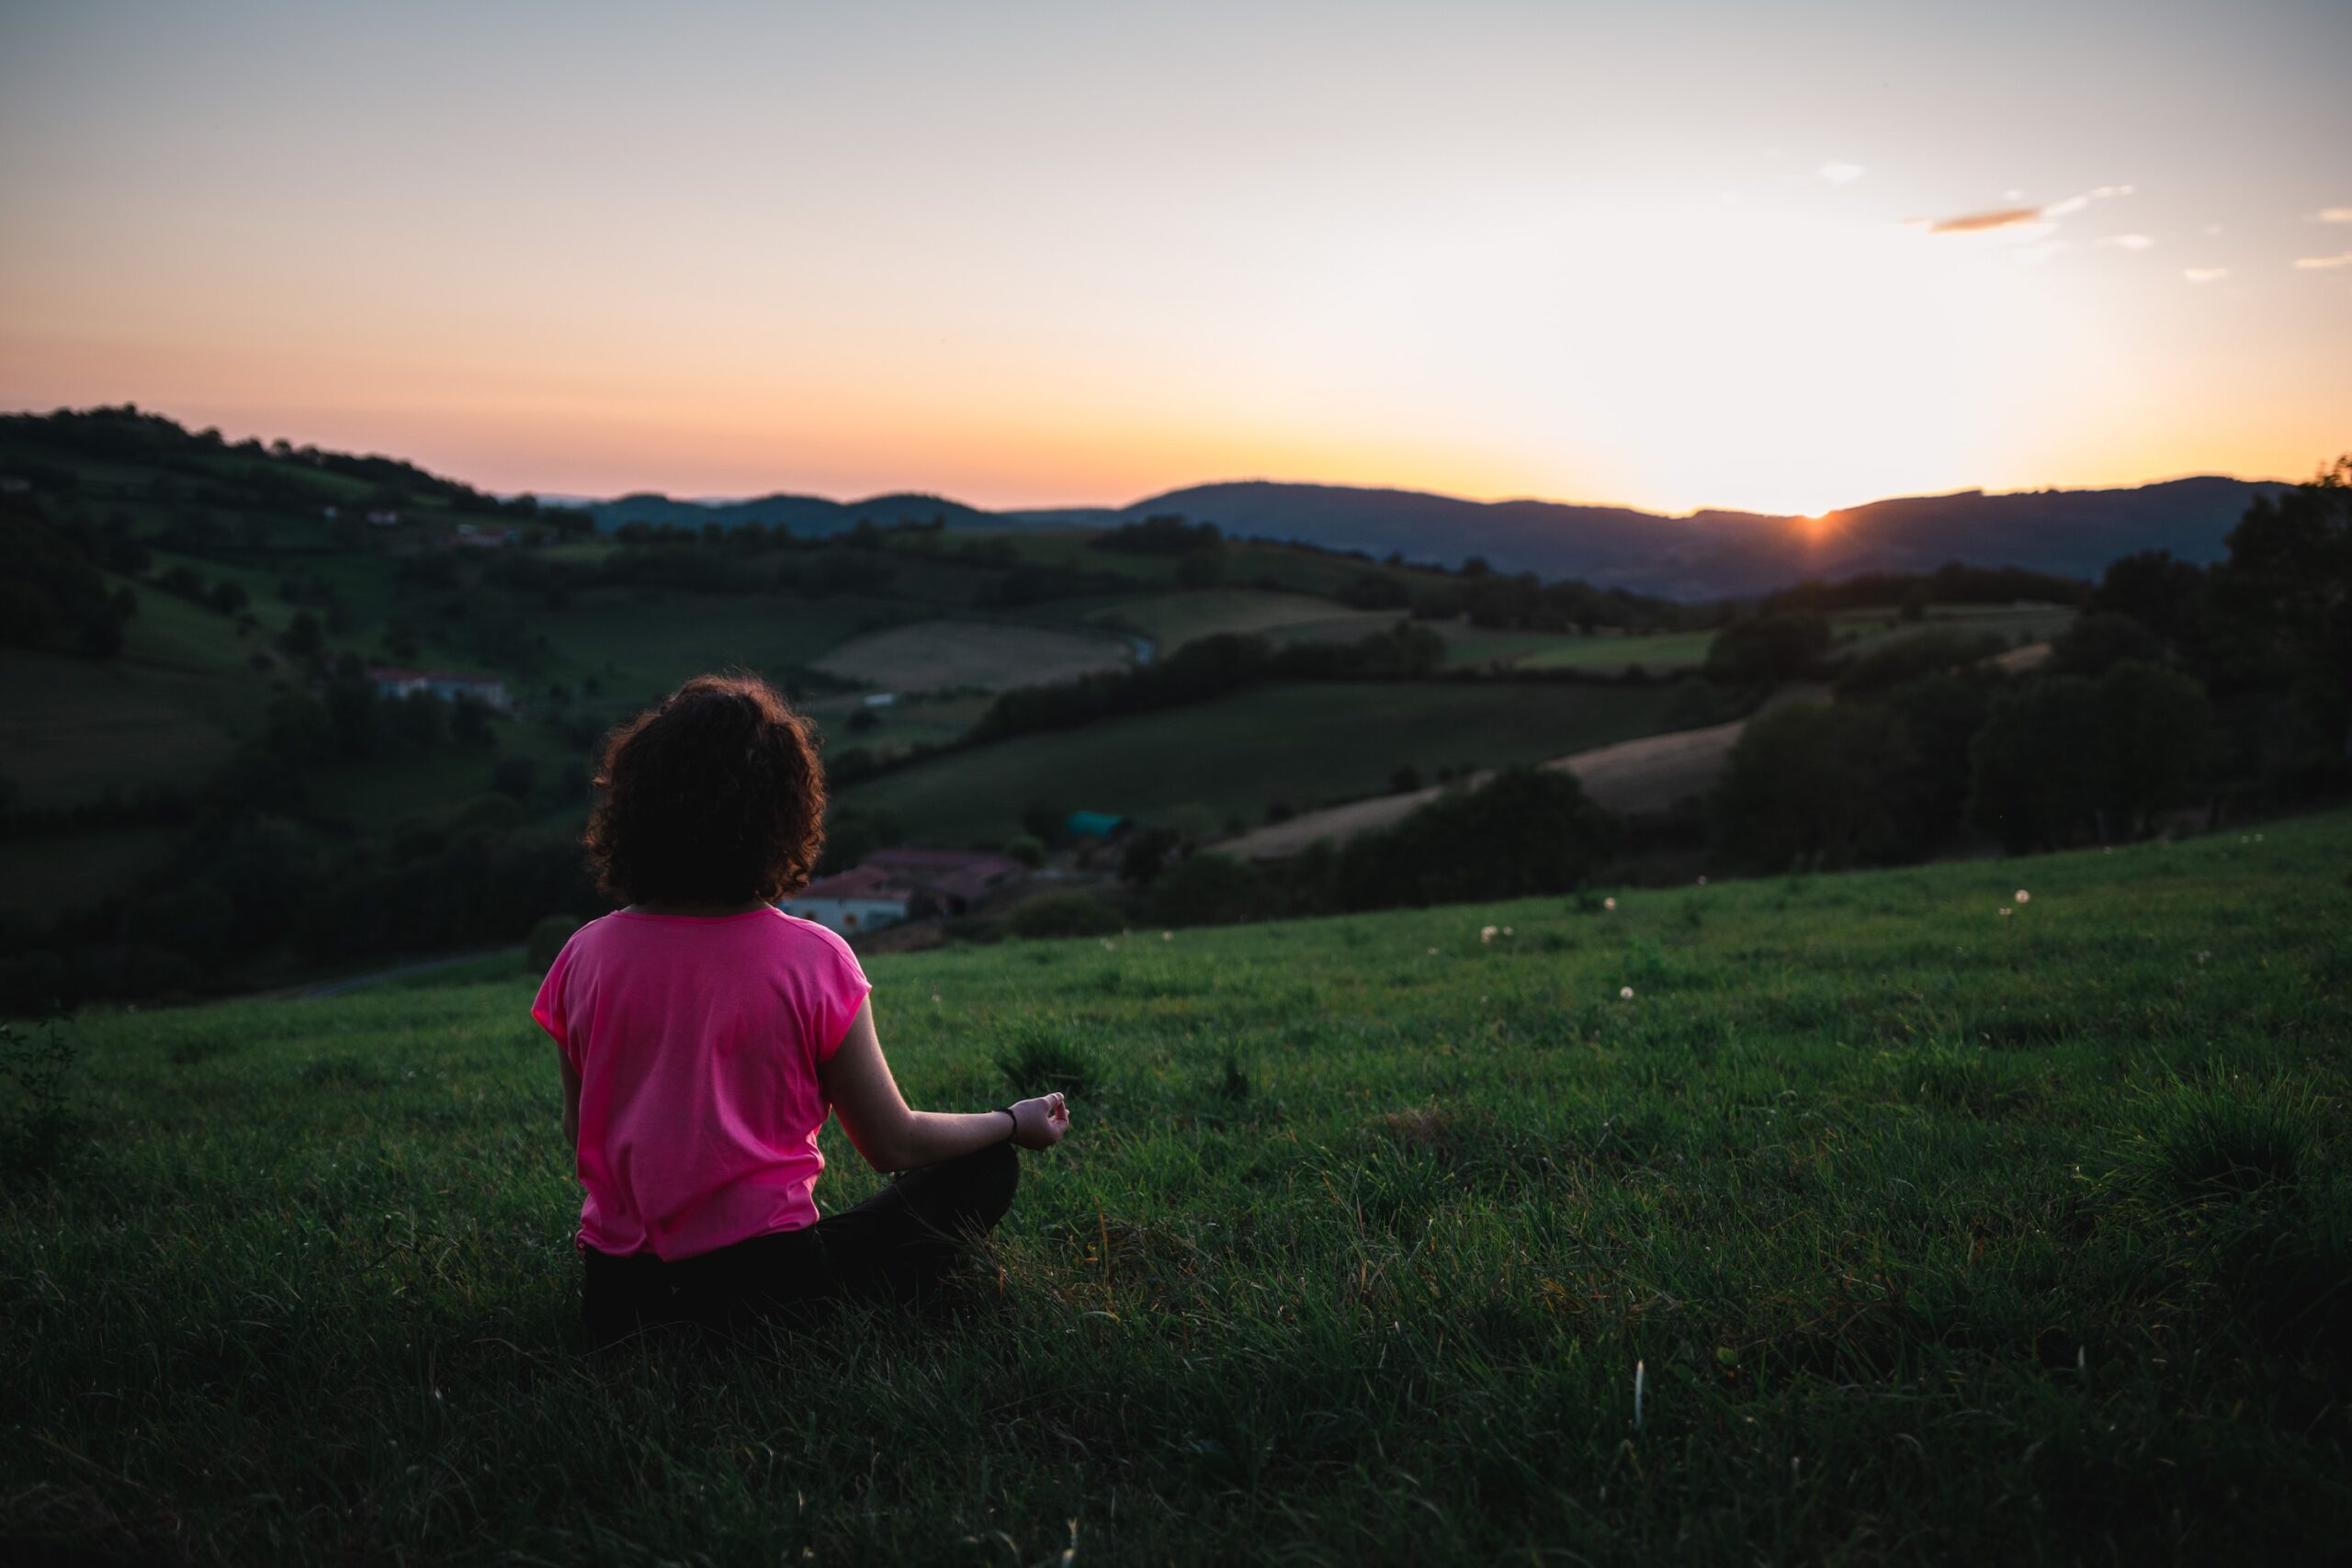 light brown skinned woman with dark hair in pink t-shirt sitting in meditation position in brightly lit green field overlooking sunrise and mountains in the distance